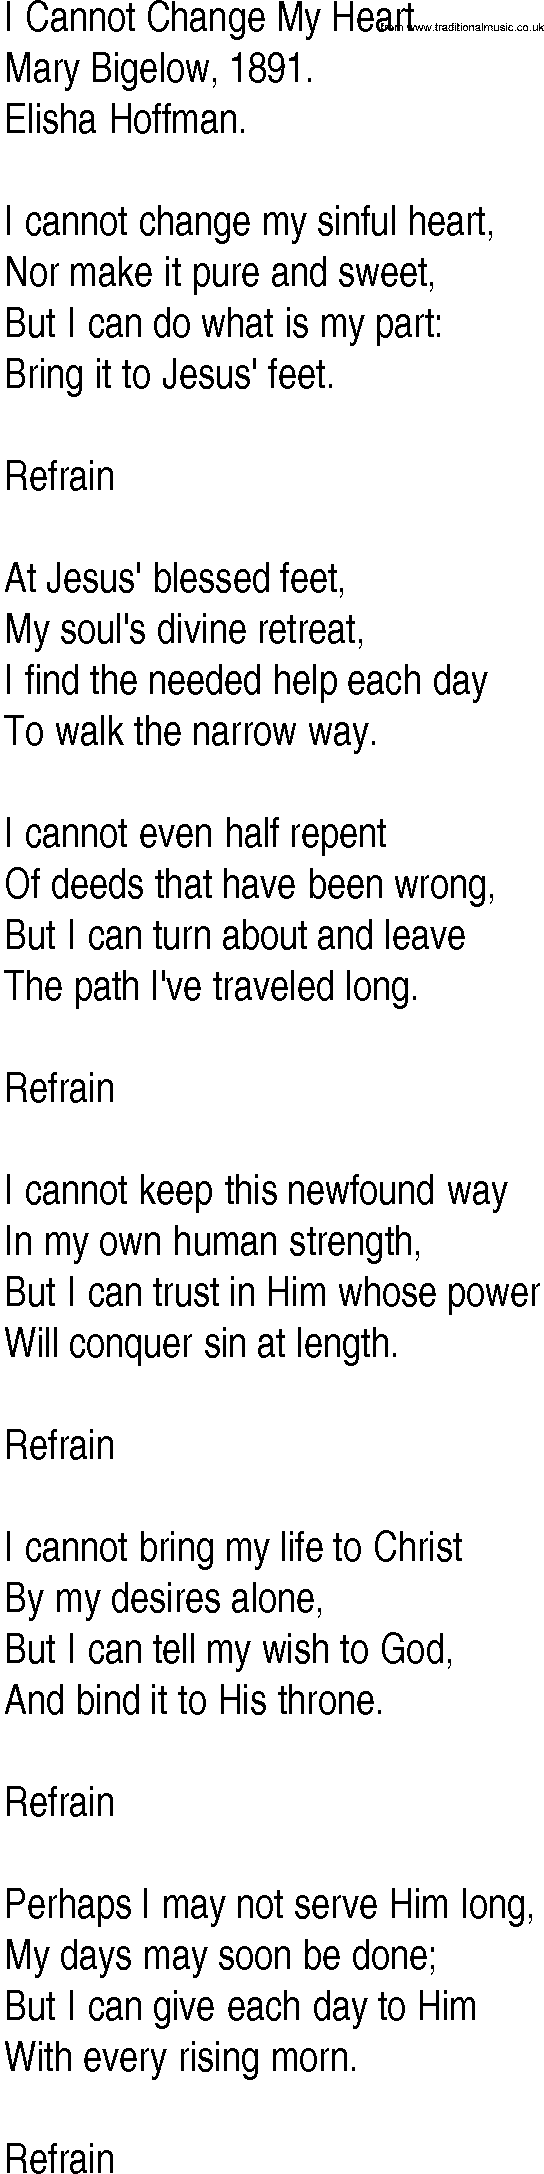 Hymn and Gospel Song: I Cannot Change My Heart by Mary Bigelow lyrics